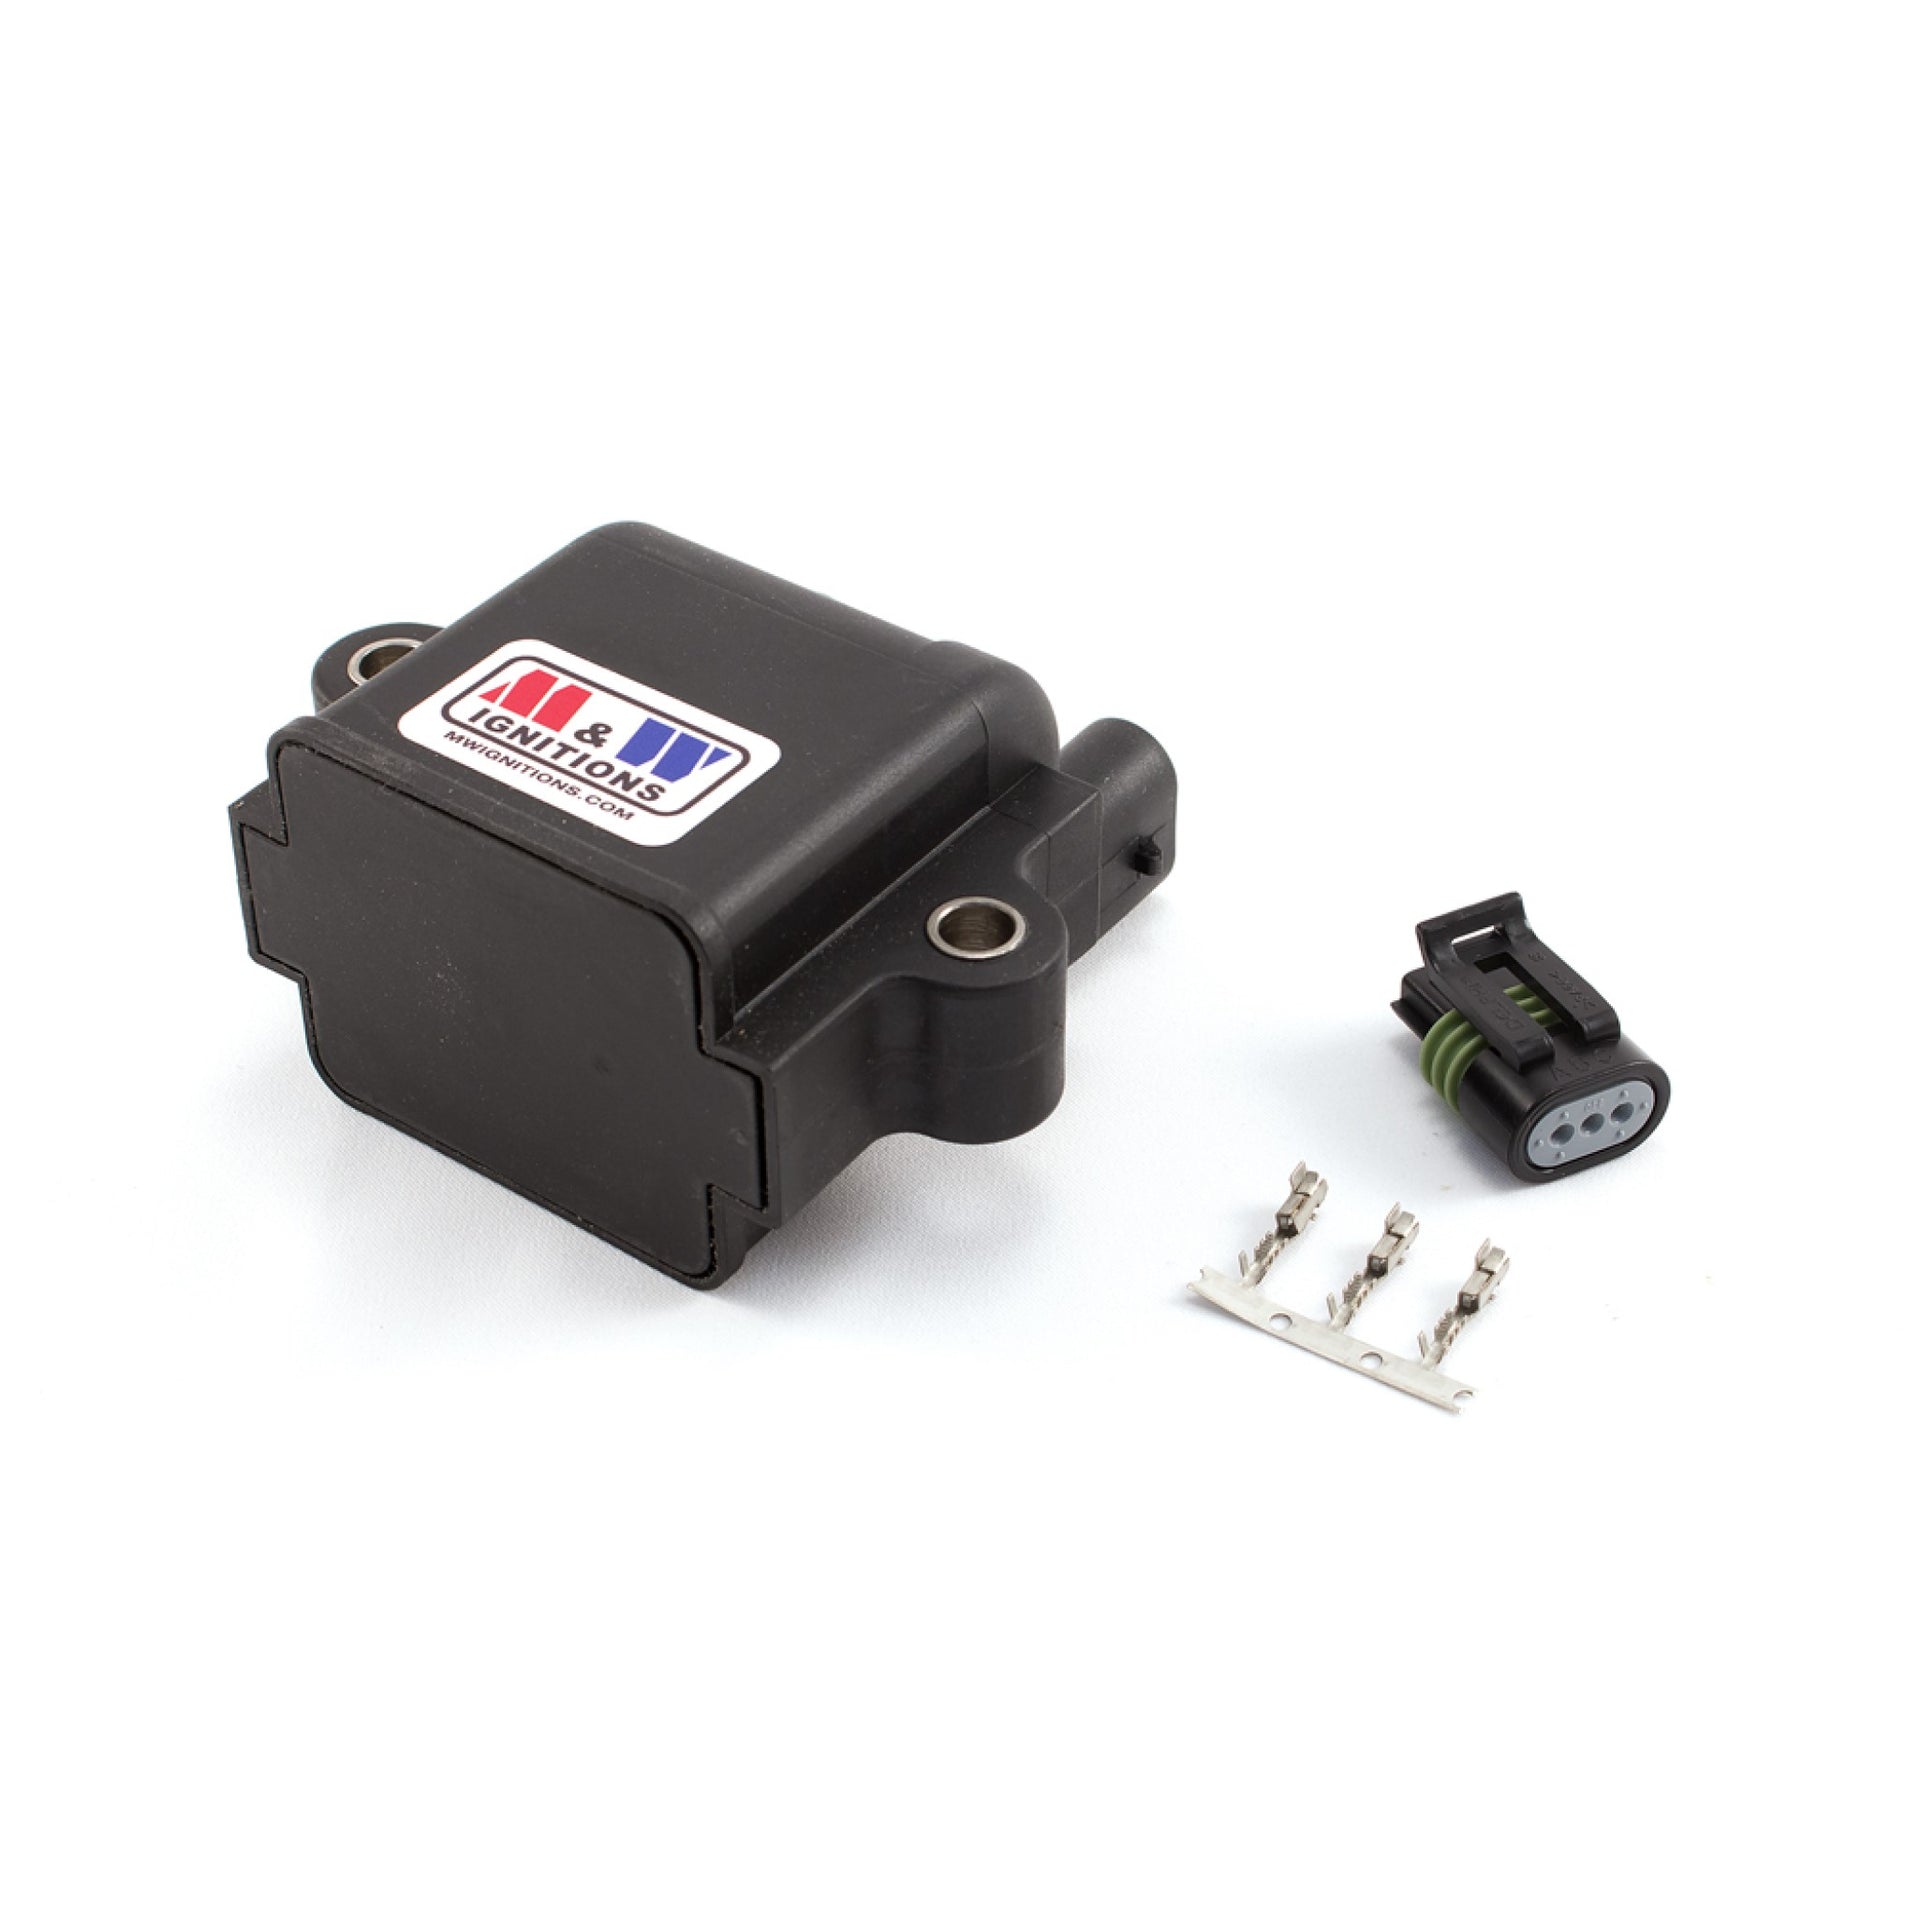 M&W Pro-10 CDI Ignition Box – Outfront Motorsports